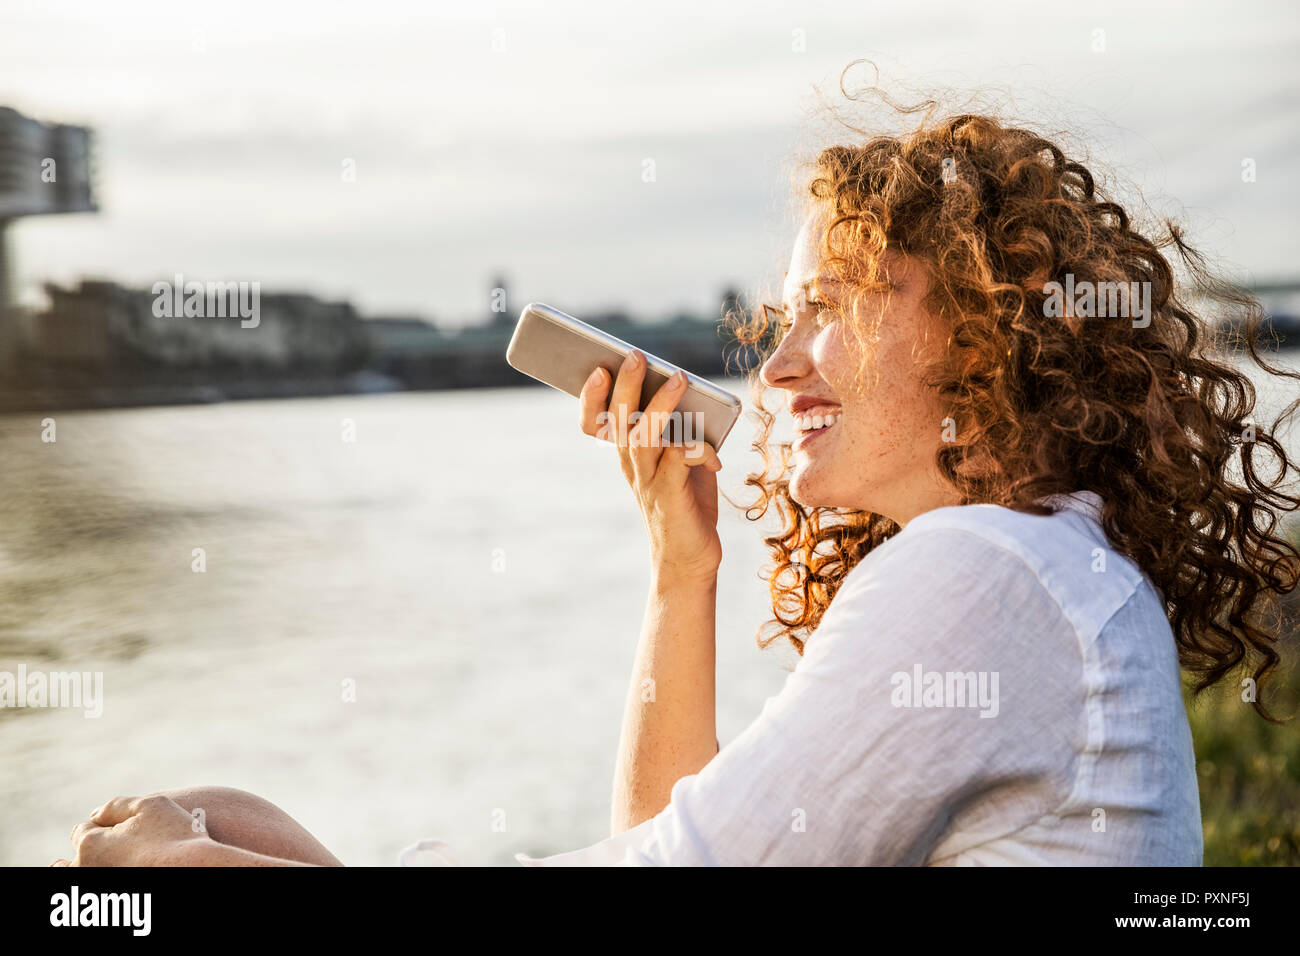 Germany, Cologne, portrait of laughing young woman on the phone sitting at riverside in the evening Stock Photo